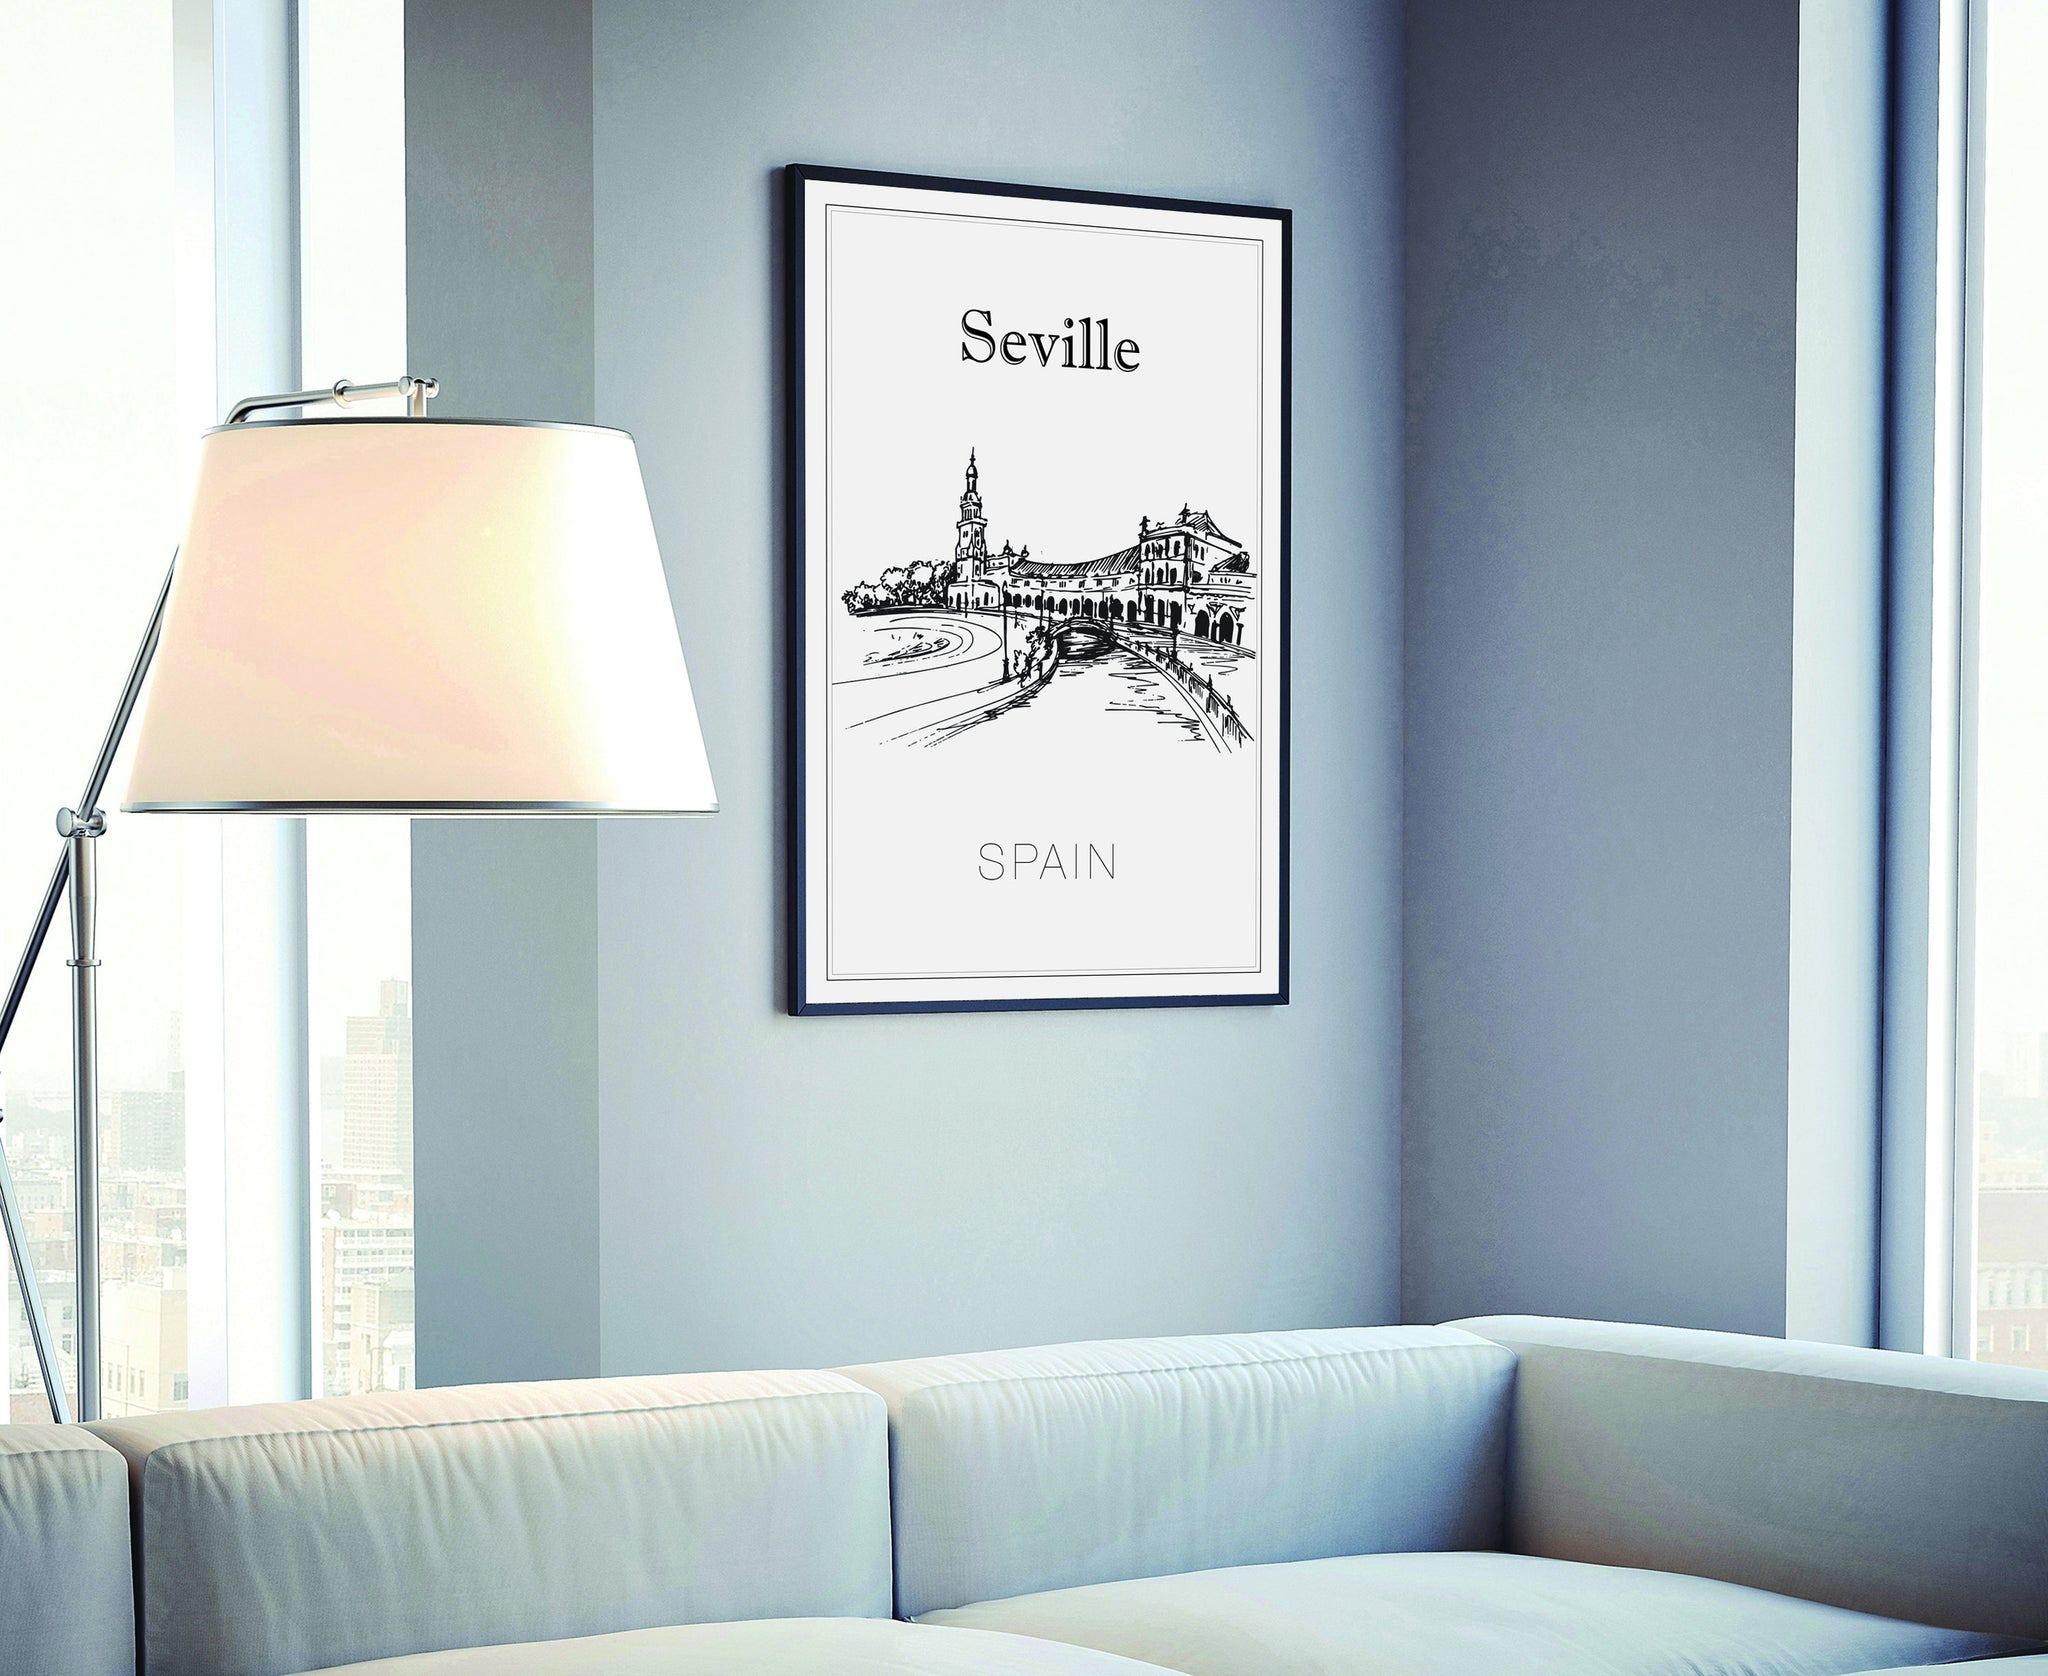 Hand Drawn Poster, Seville Travel Poster, Seville Poster Wall Art, Spain Cityscape and Landmark Map, City Map Poster for Home Office